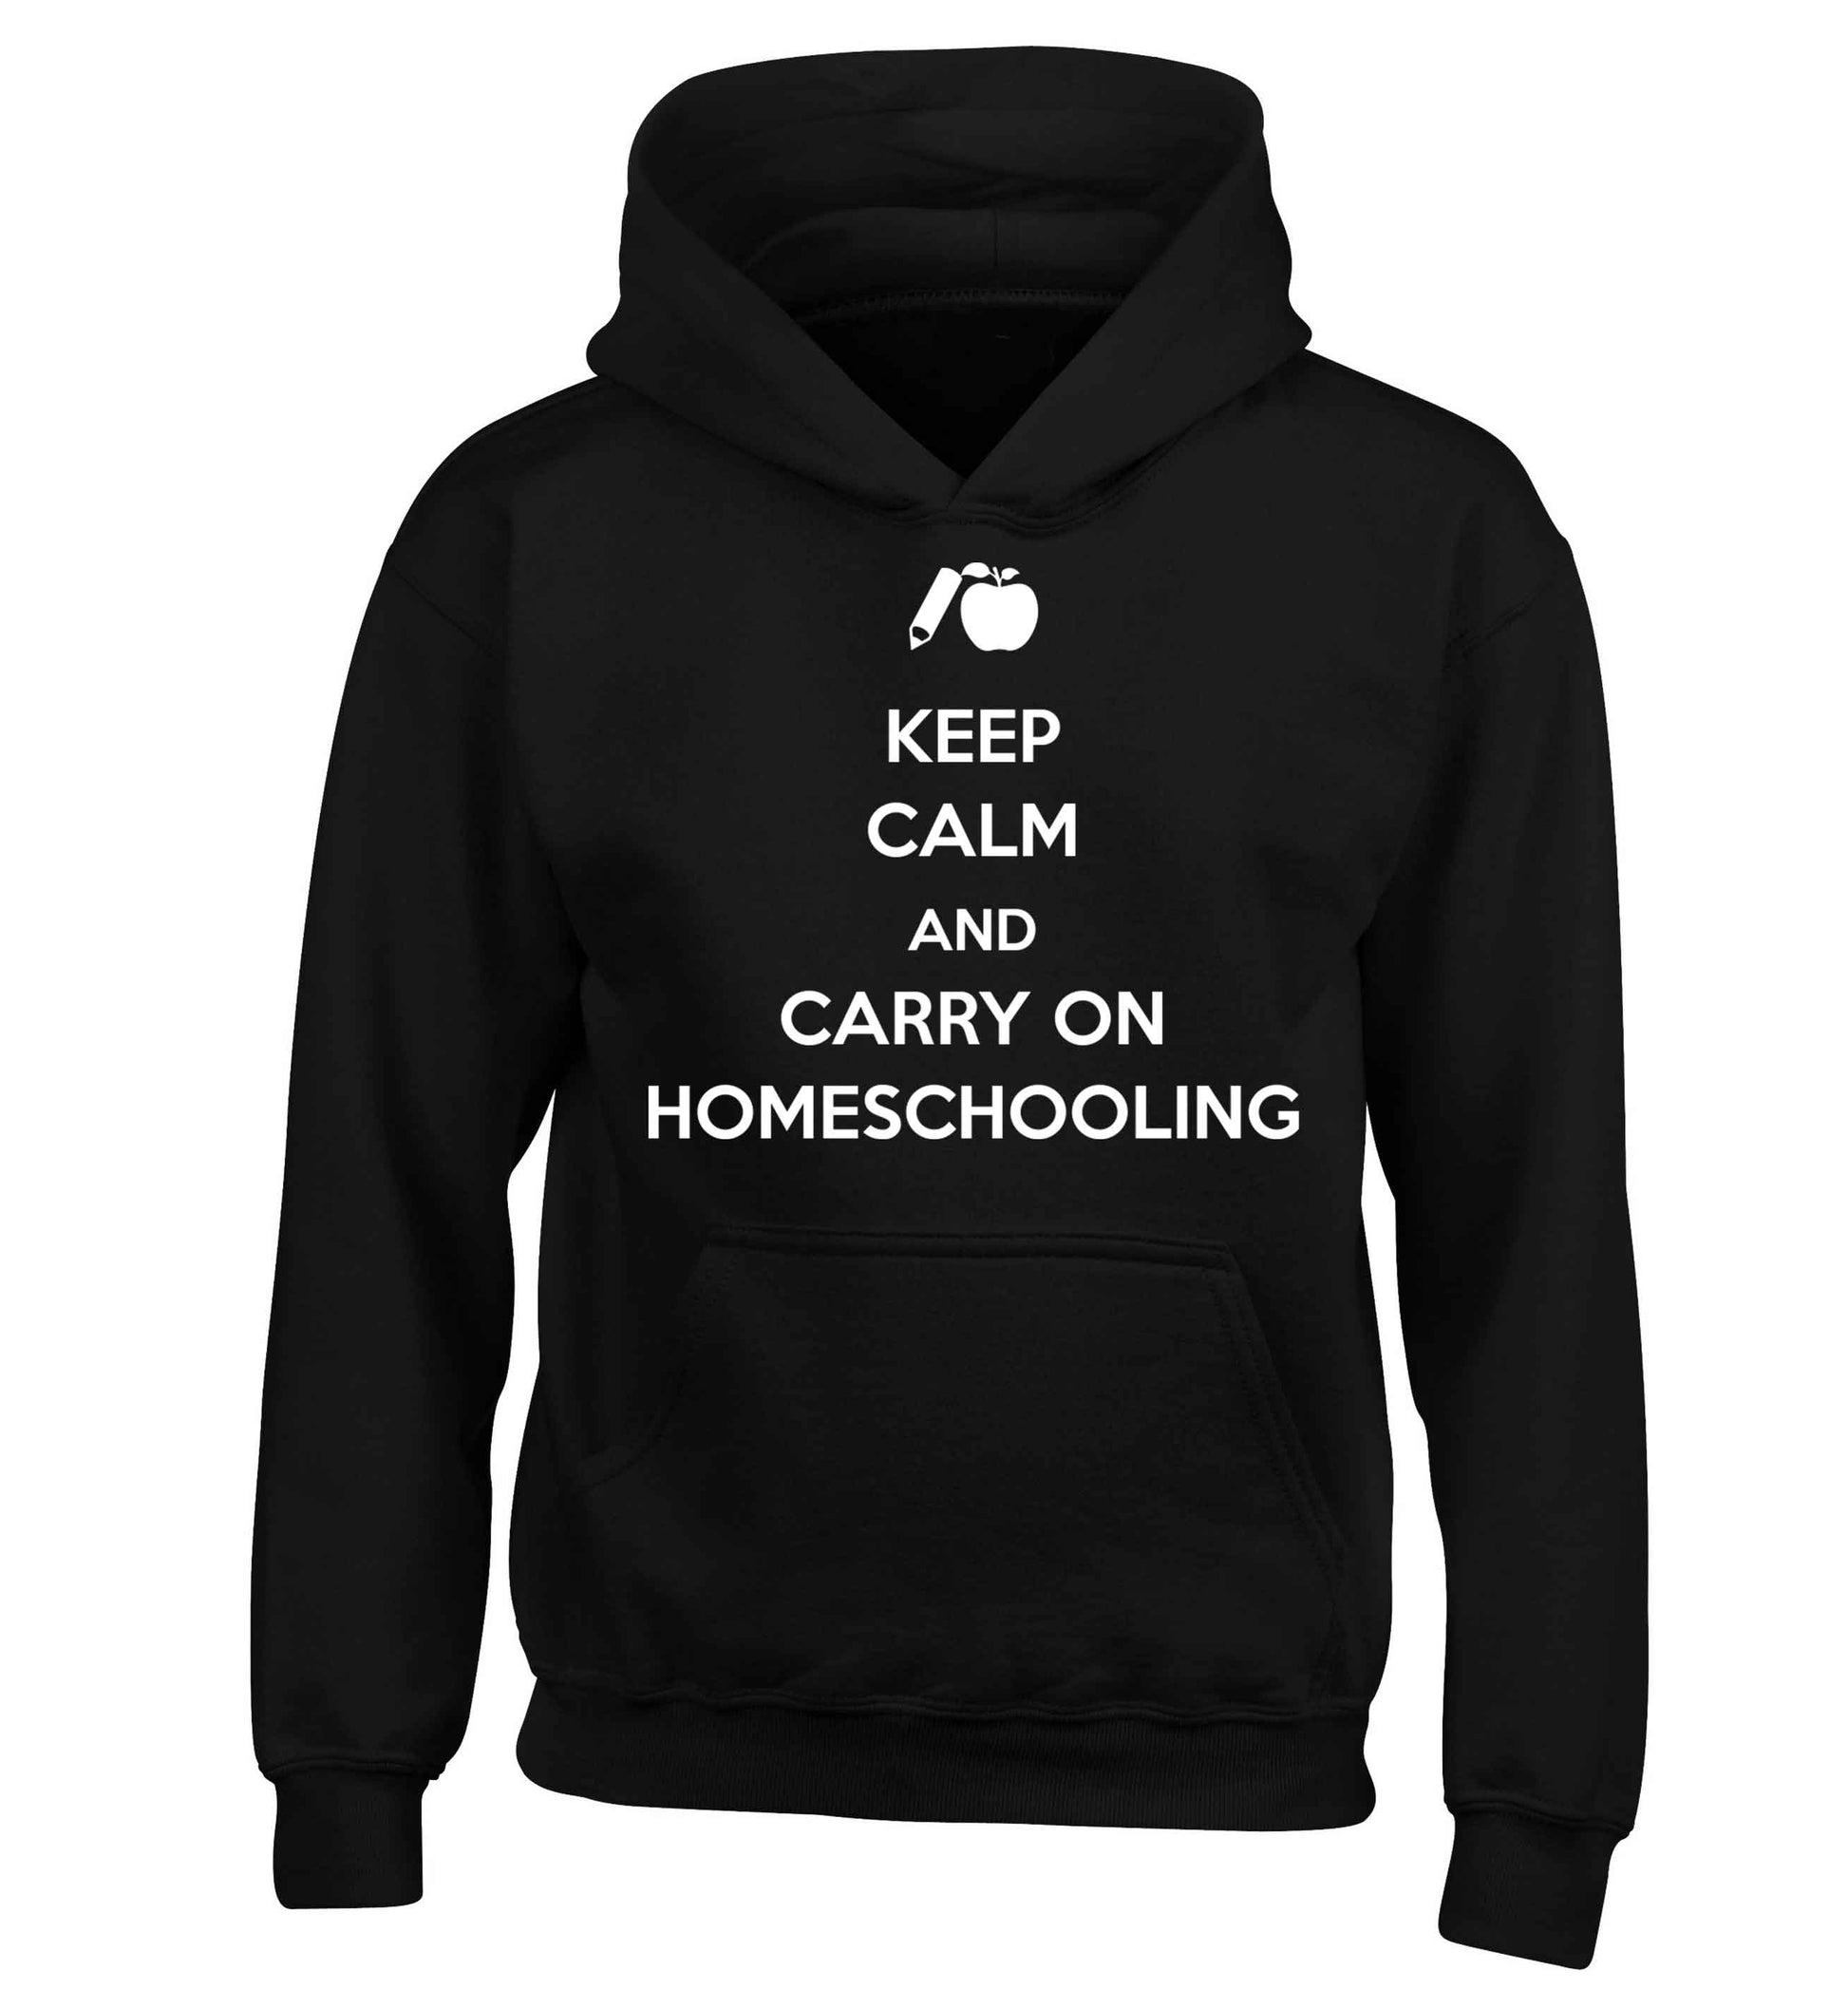 Keep calm and carry on homeschooling children's black hoodie 12-13 Years